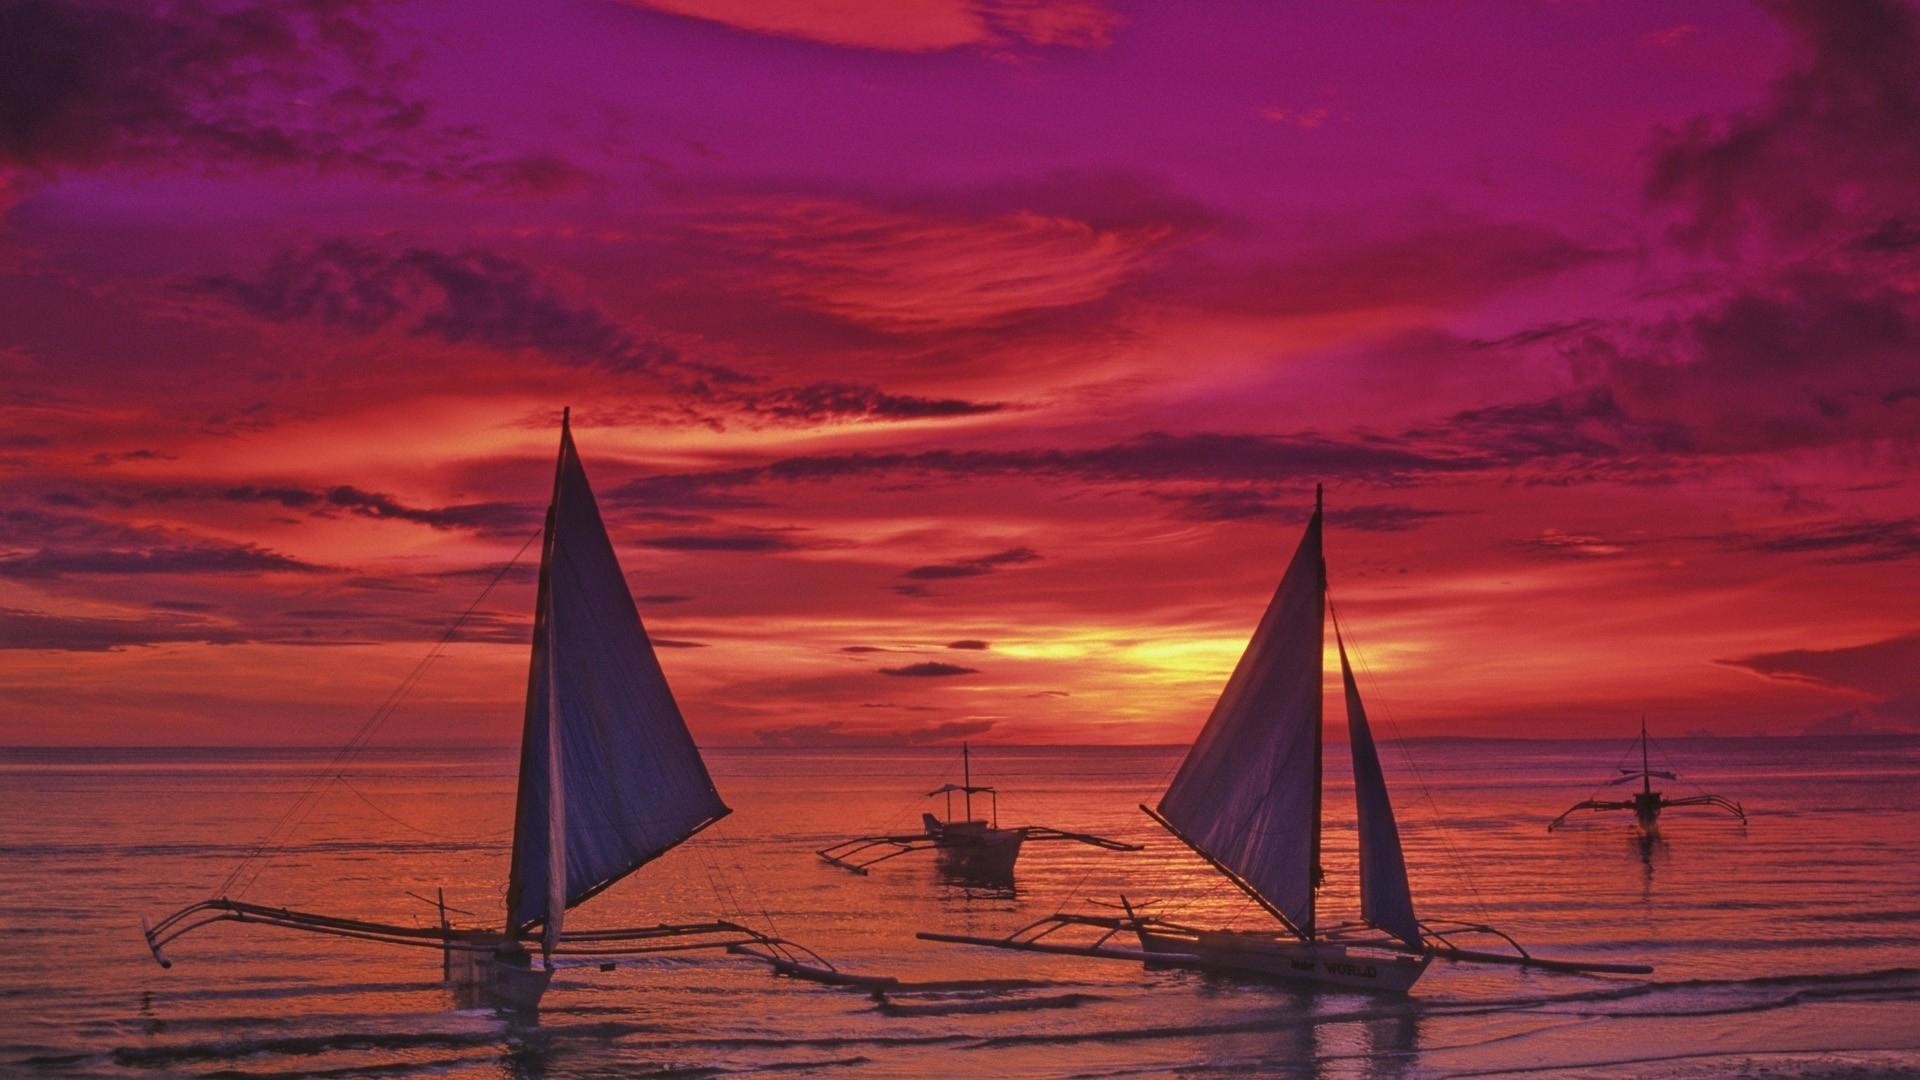 1920x1080 SAILBOATS IN A WONDERFUL SUNSET IN THE PHILIPPINES WALLPAPER .